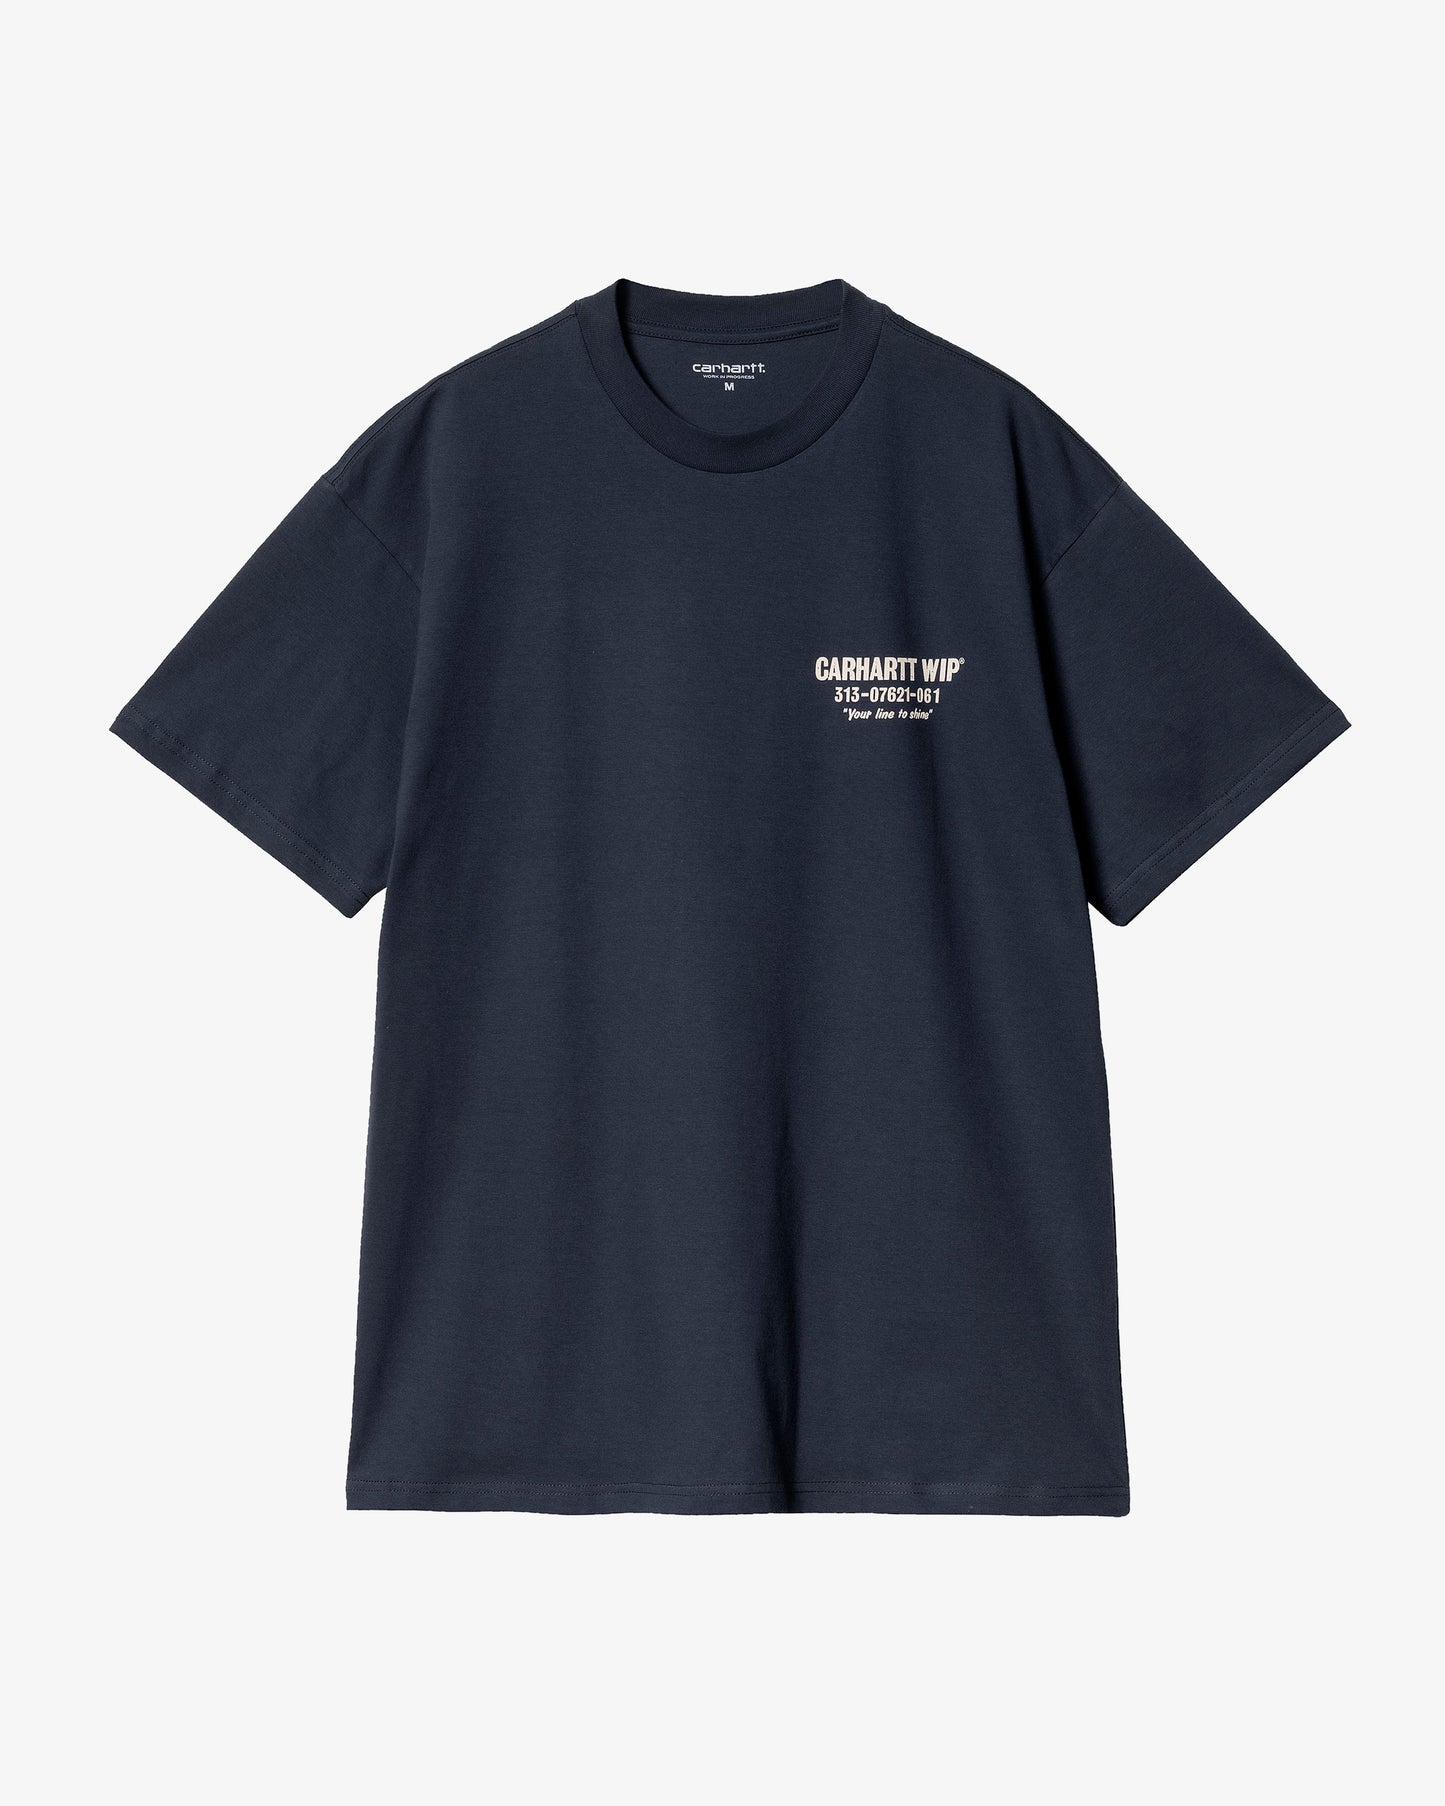 Carhartt WIP S/S Less Troubles T-Shirt